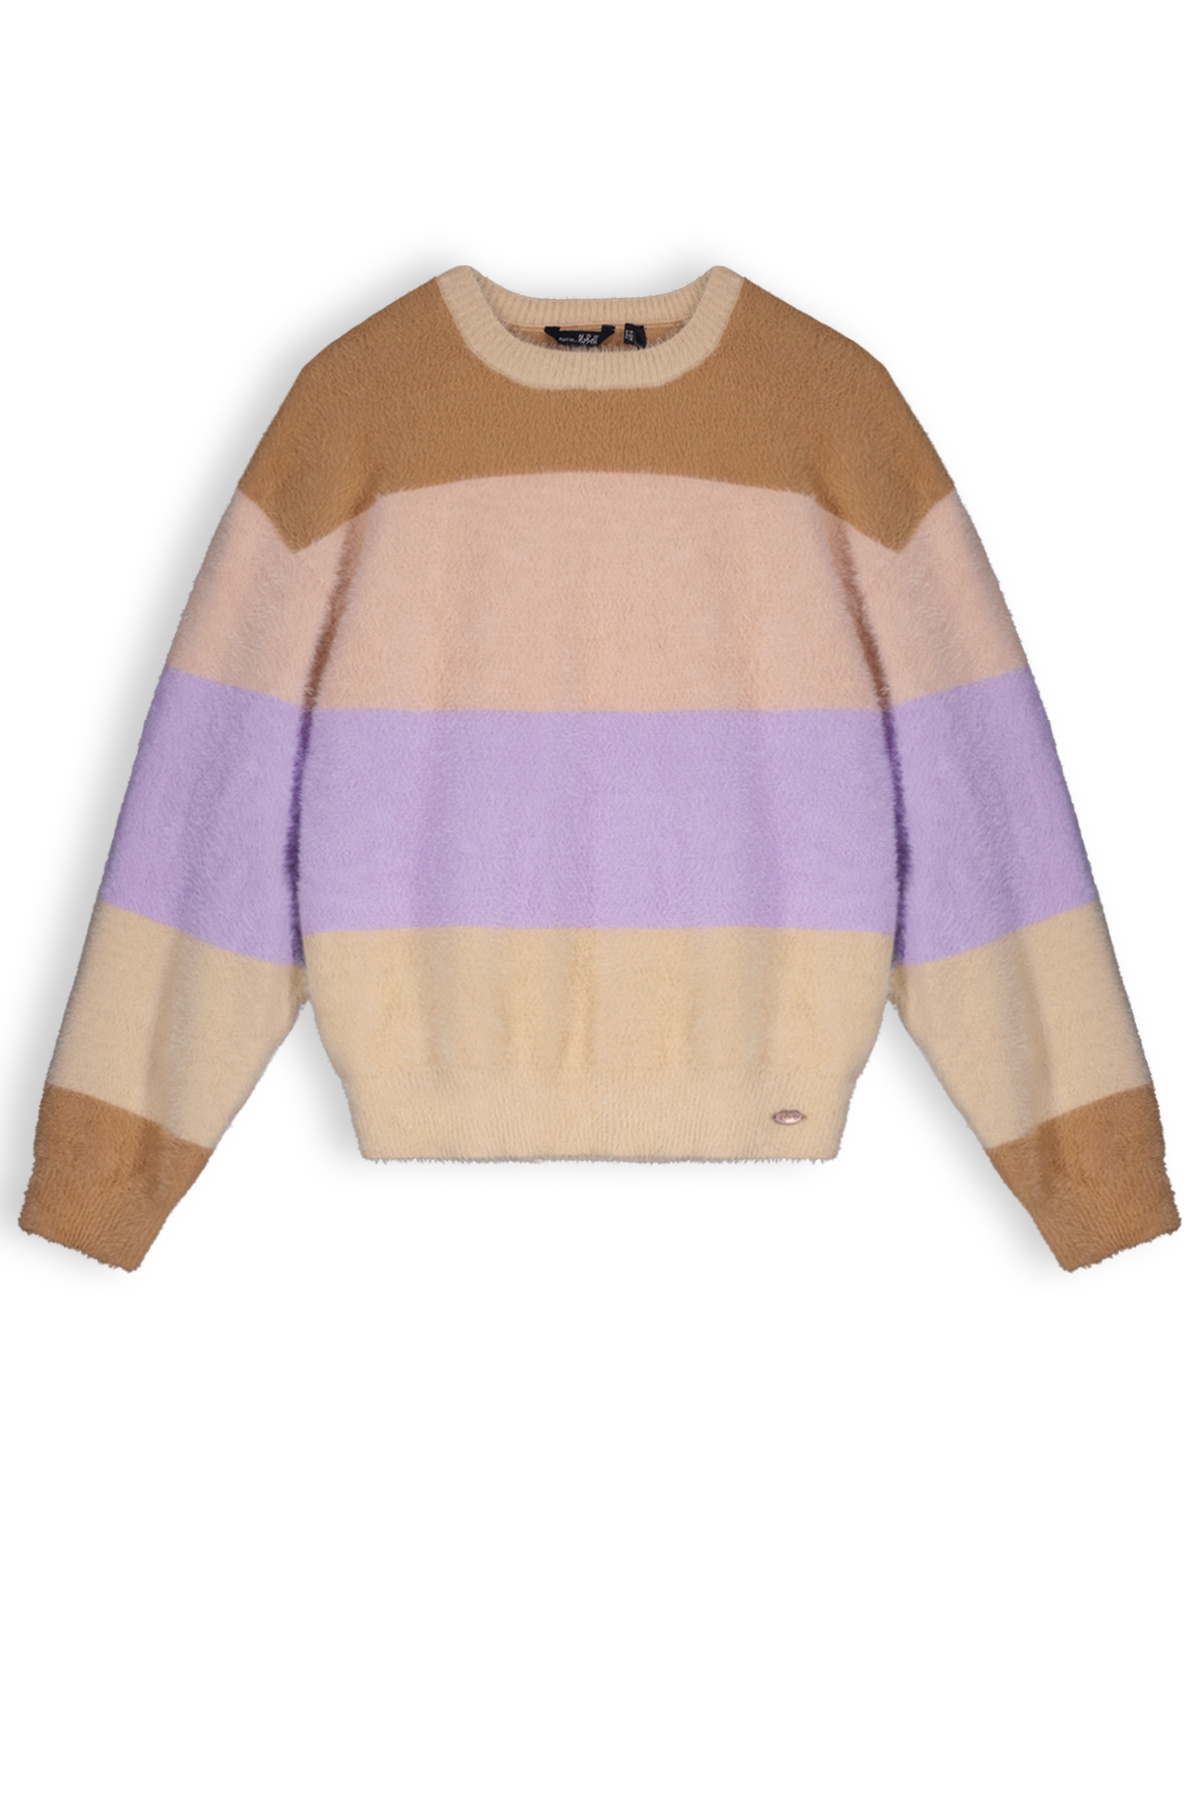 NoBell' - Sweater - Lupine Lilac - Maat 158-164